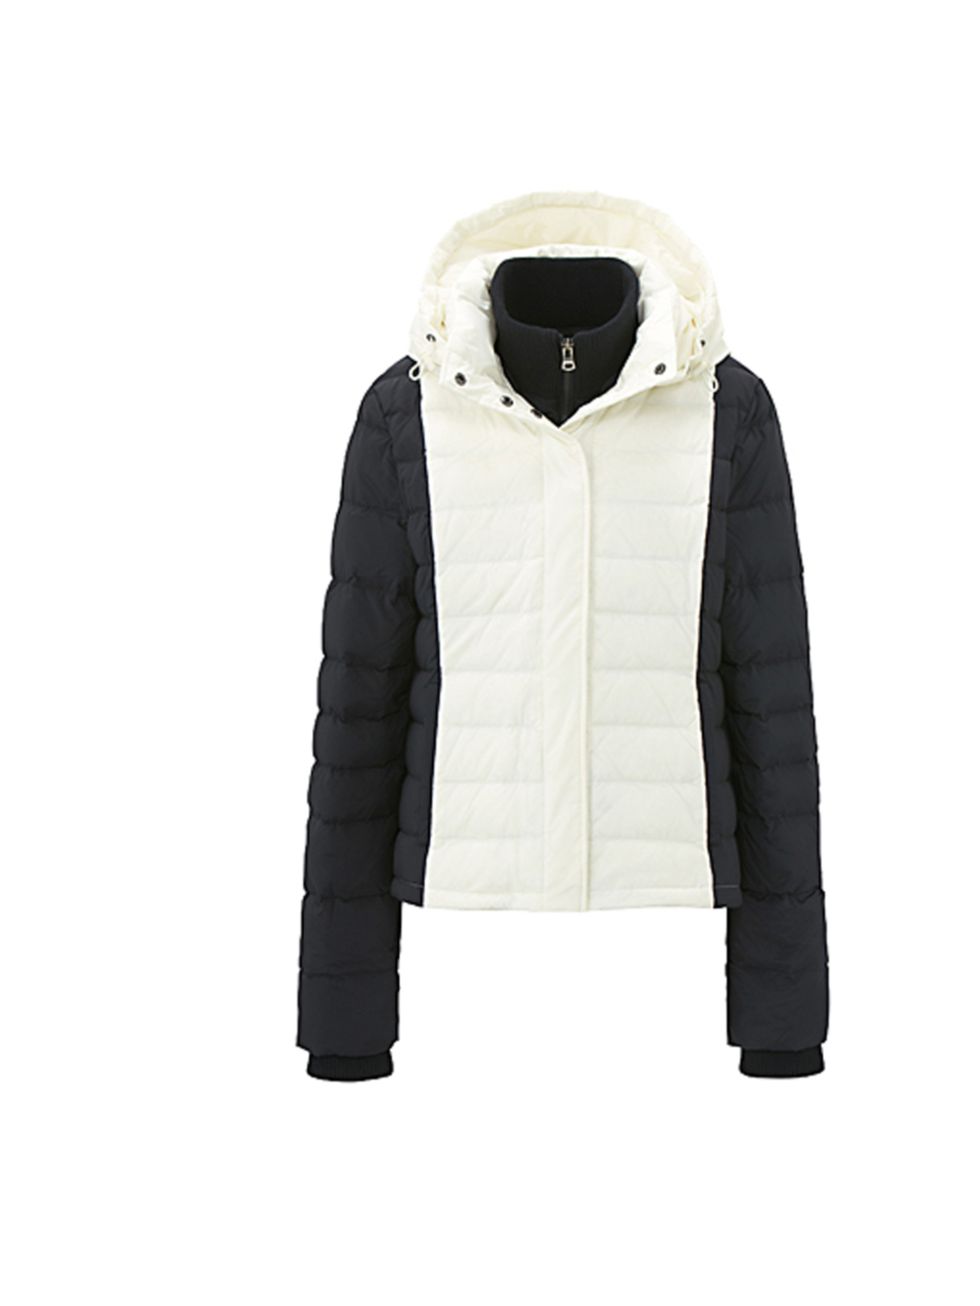 <p>One of the most unexpected collaborations of the year has arrived- head to Uniqlo this week to pick up hip label Theorys cool and cosy puffa jacket <a href="http://shop.uniqlo.com/uk/goods/075251">T Down by Theory for Uniqlo</a> monochrome jacket, £8